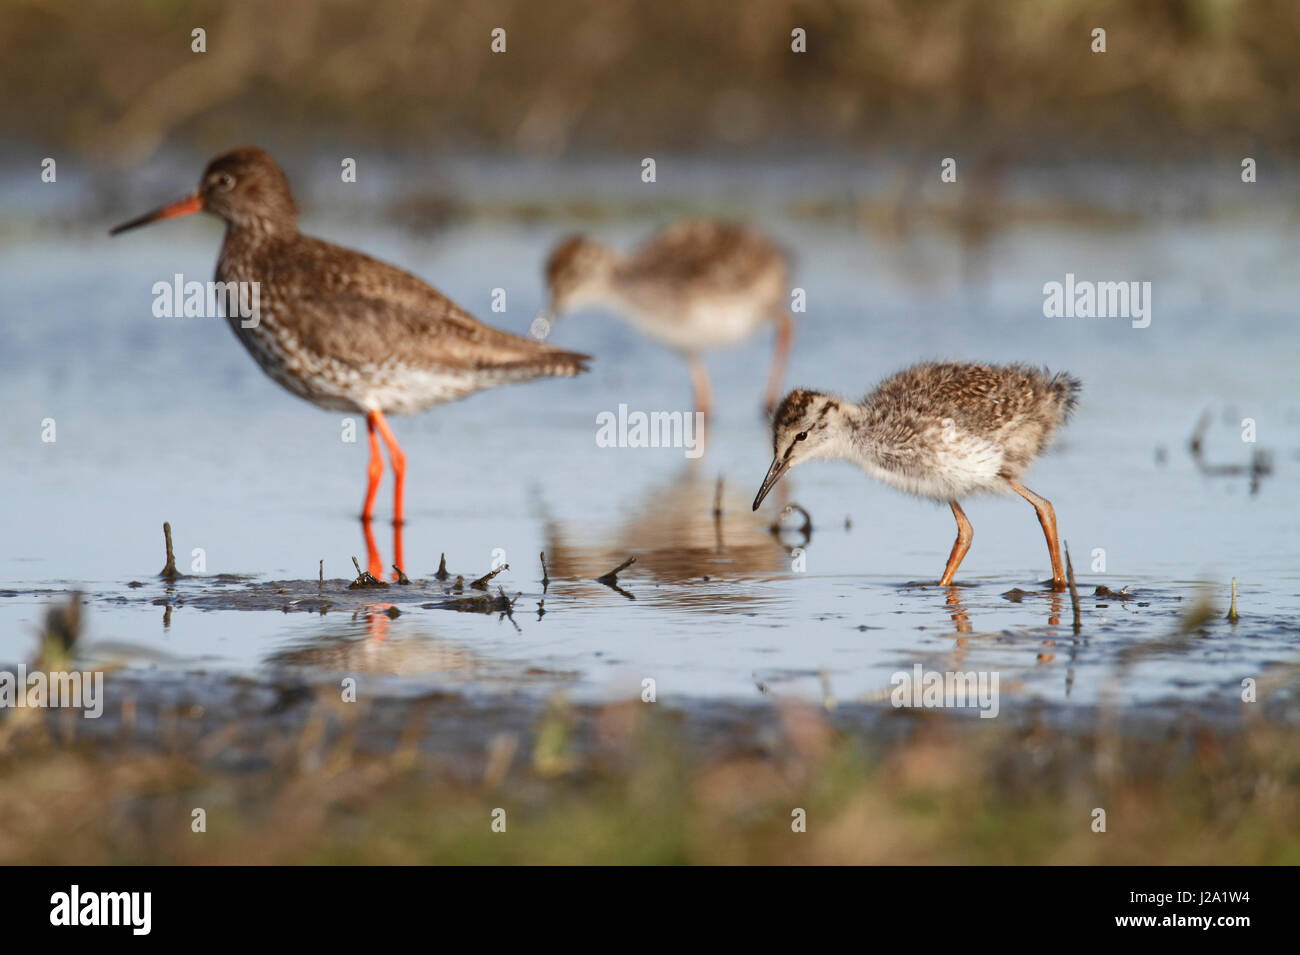 Common redshank with two chicks foraging in wetland in rural area Stock Photo